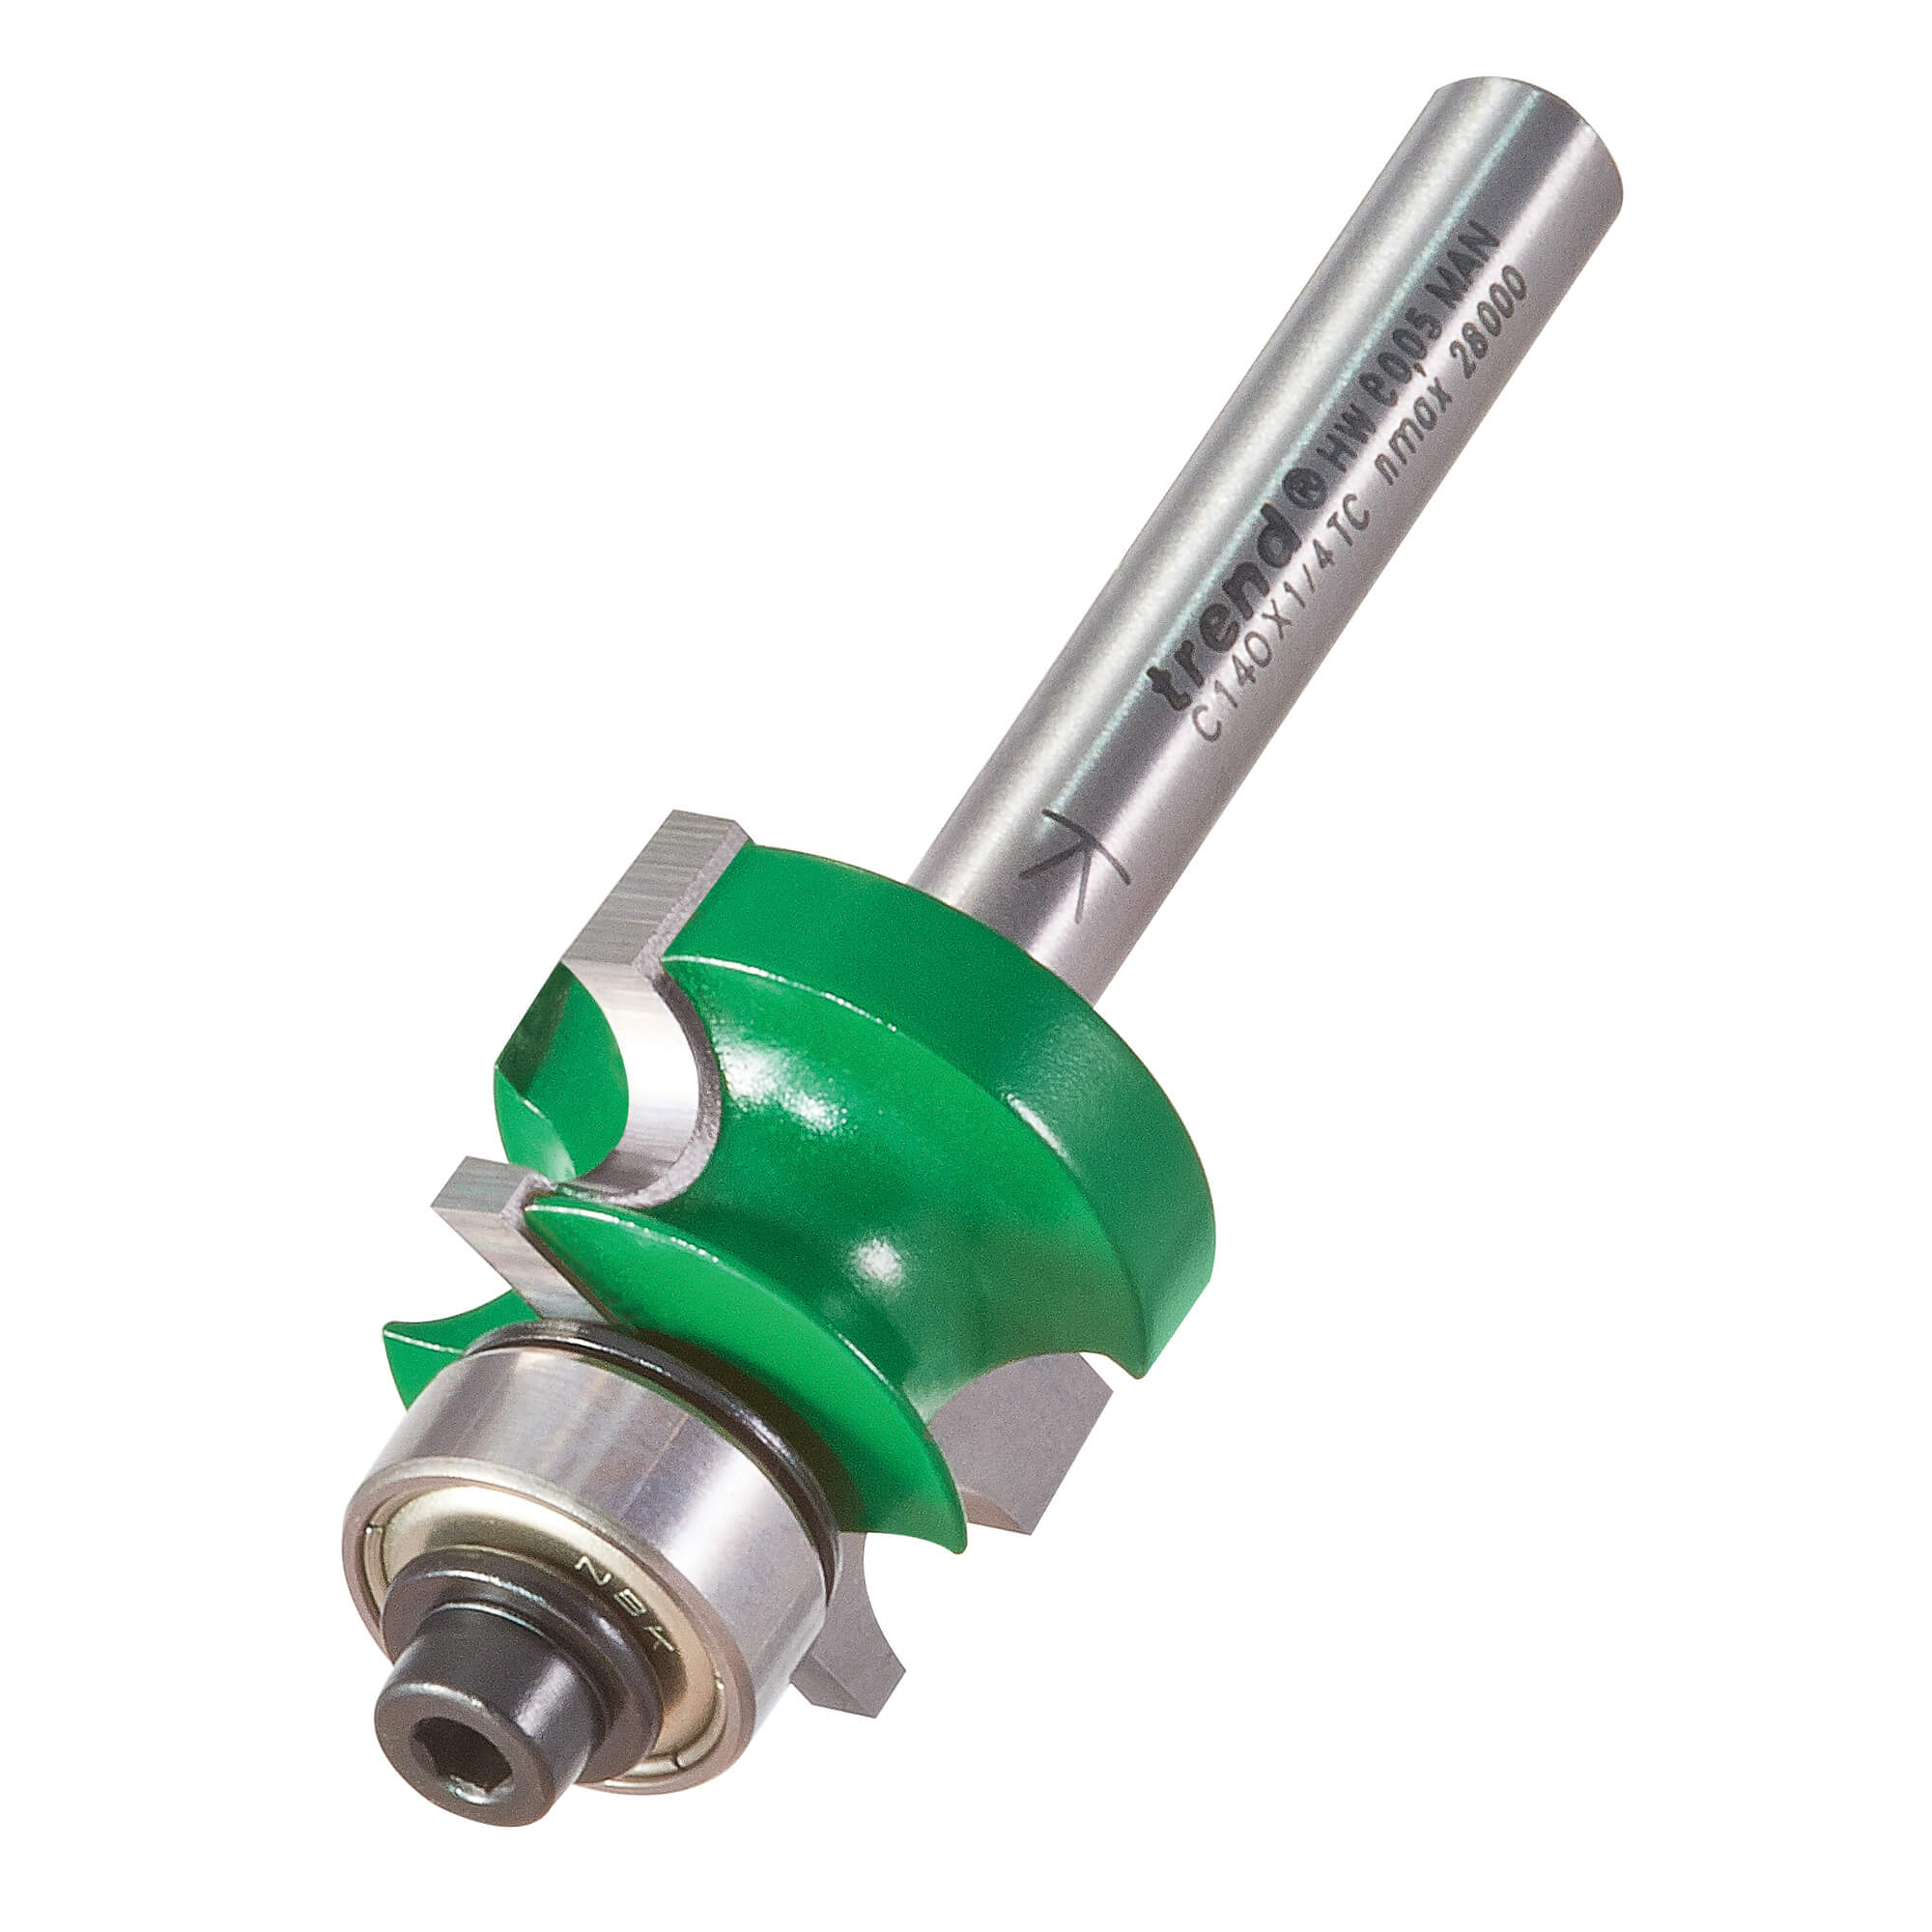 Image of Trend CRAFTPRO Bearing Guided Corner Bead Router Cutter 22.3mm 14mm 1/4"